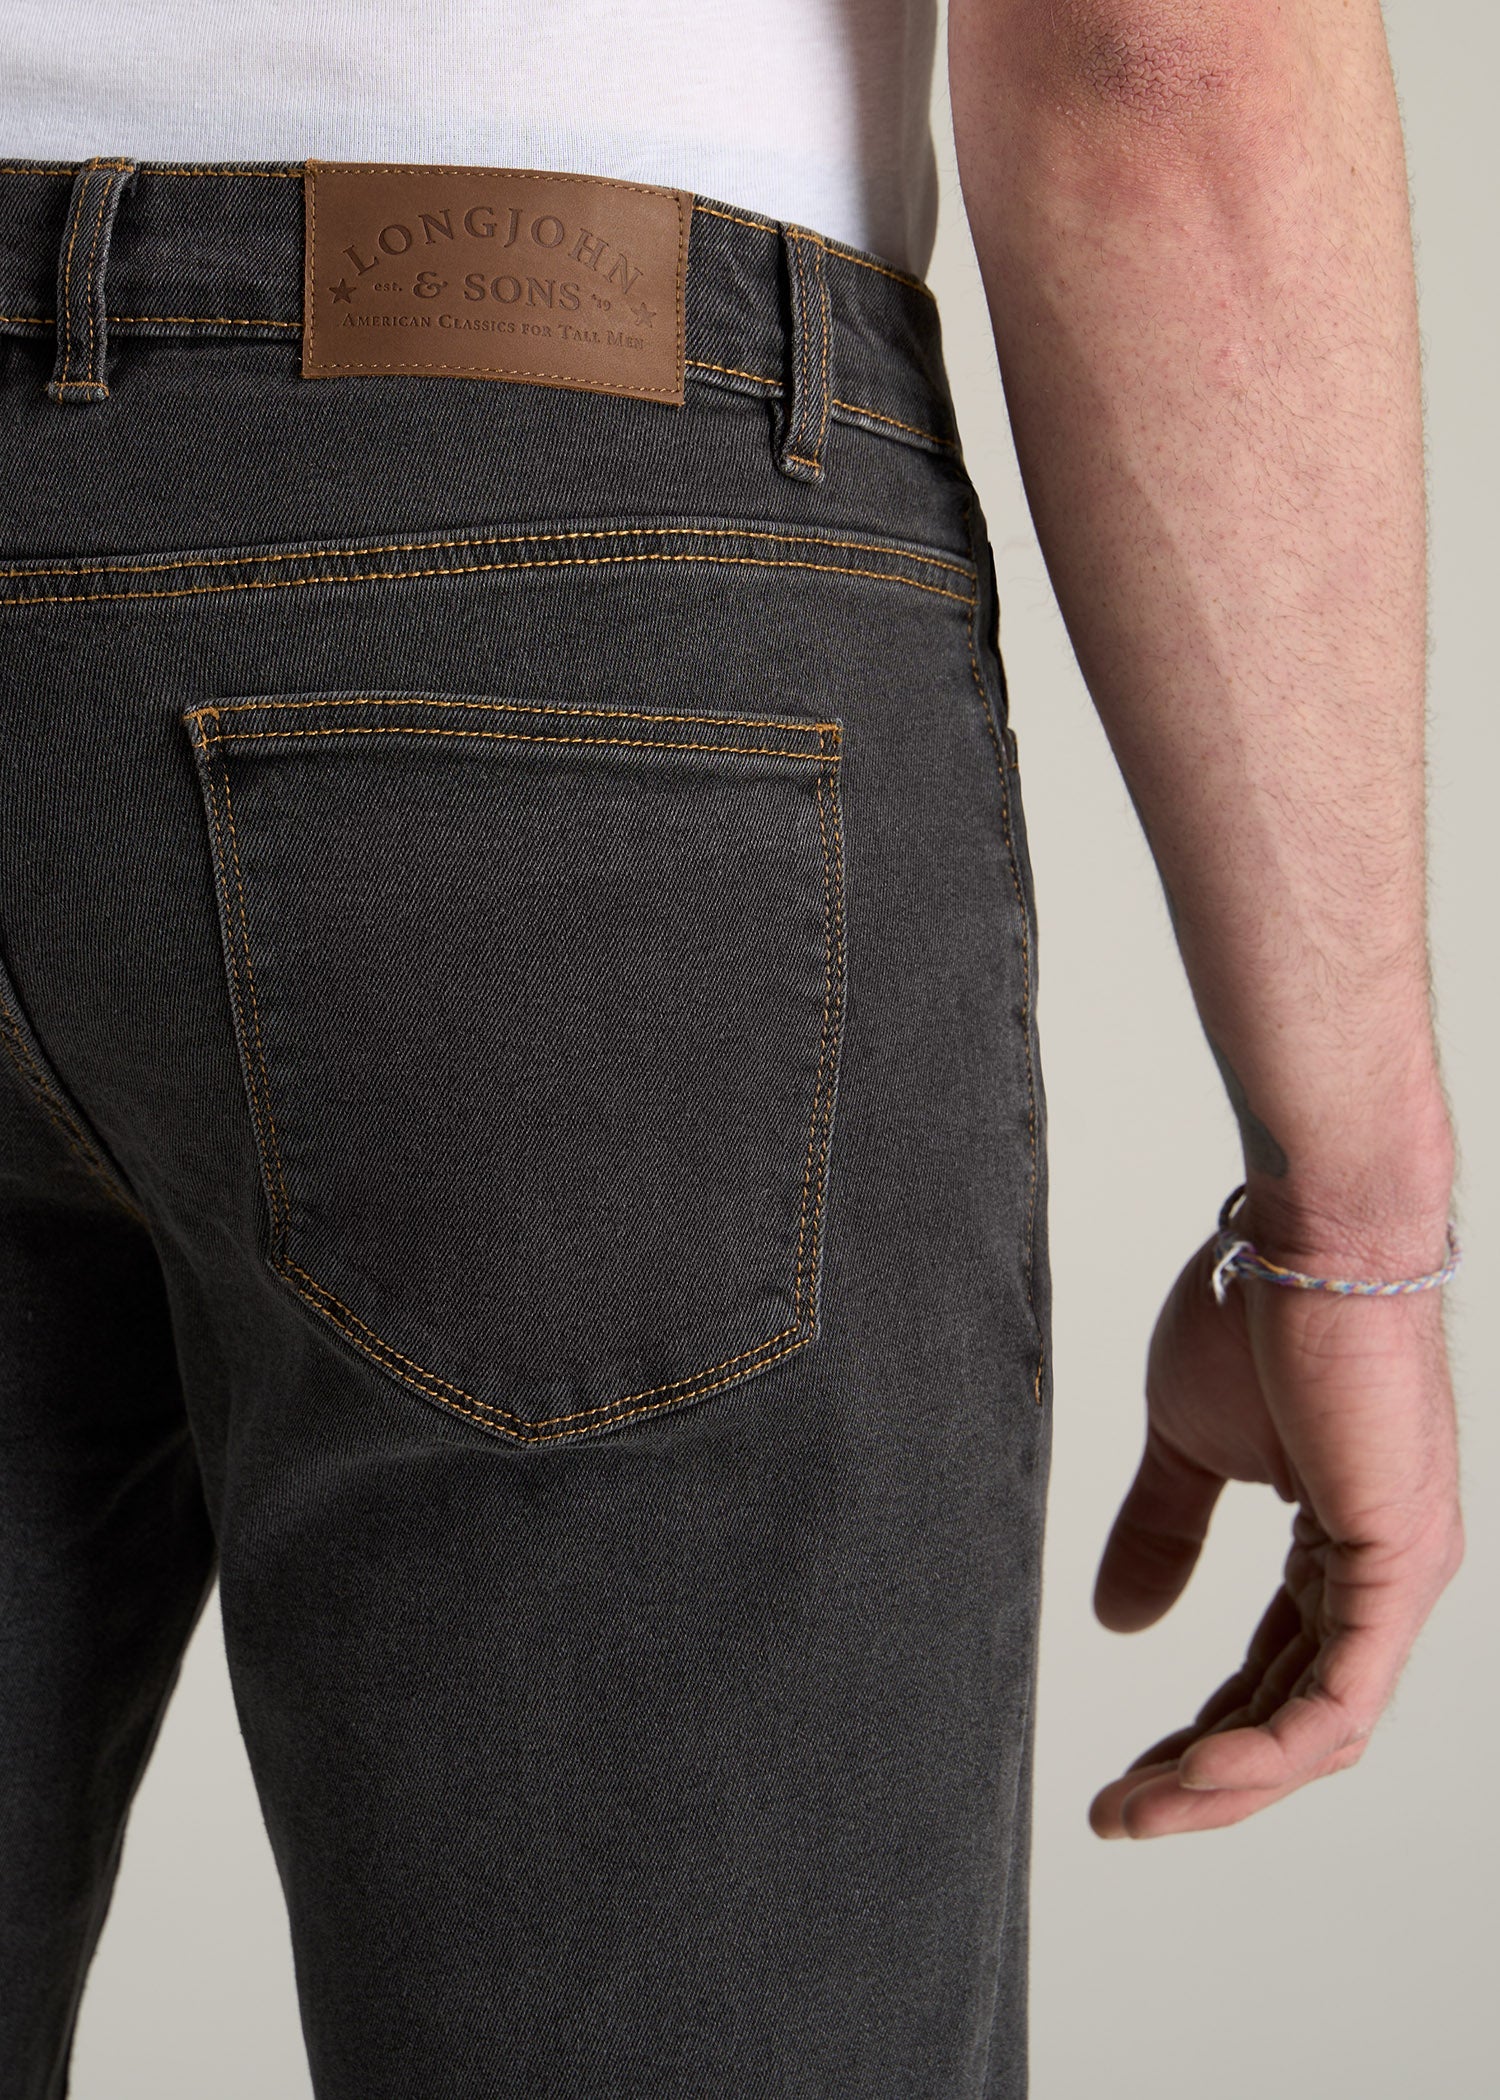 LJ&S Tapered Jeans for Tall Men | American Tall